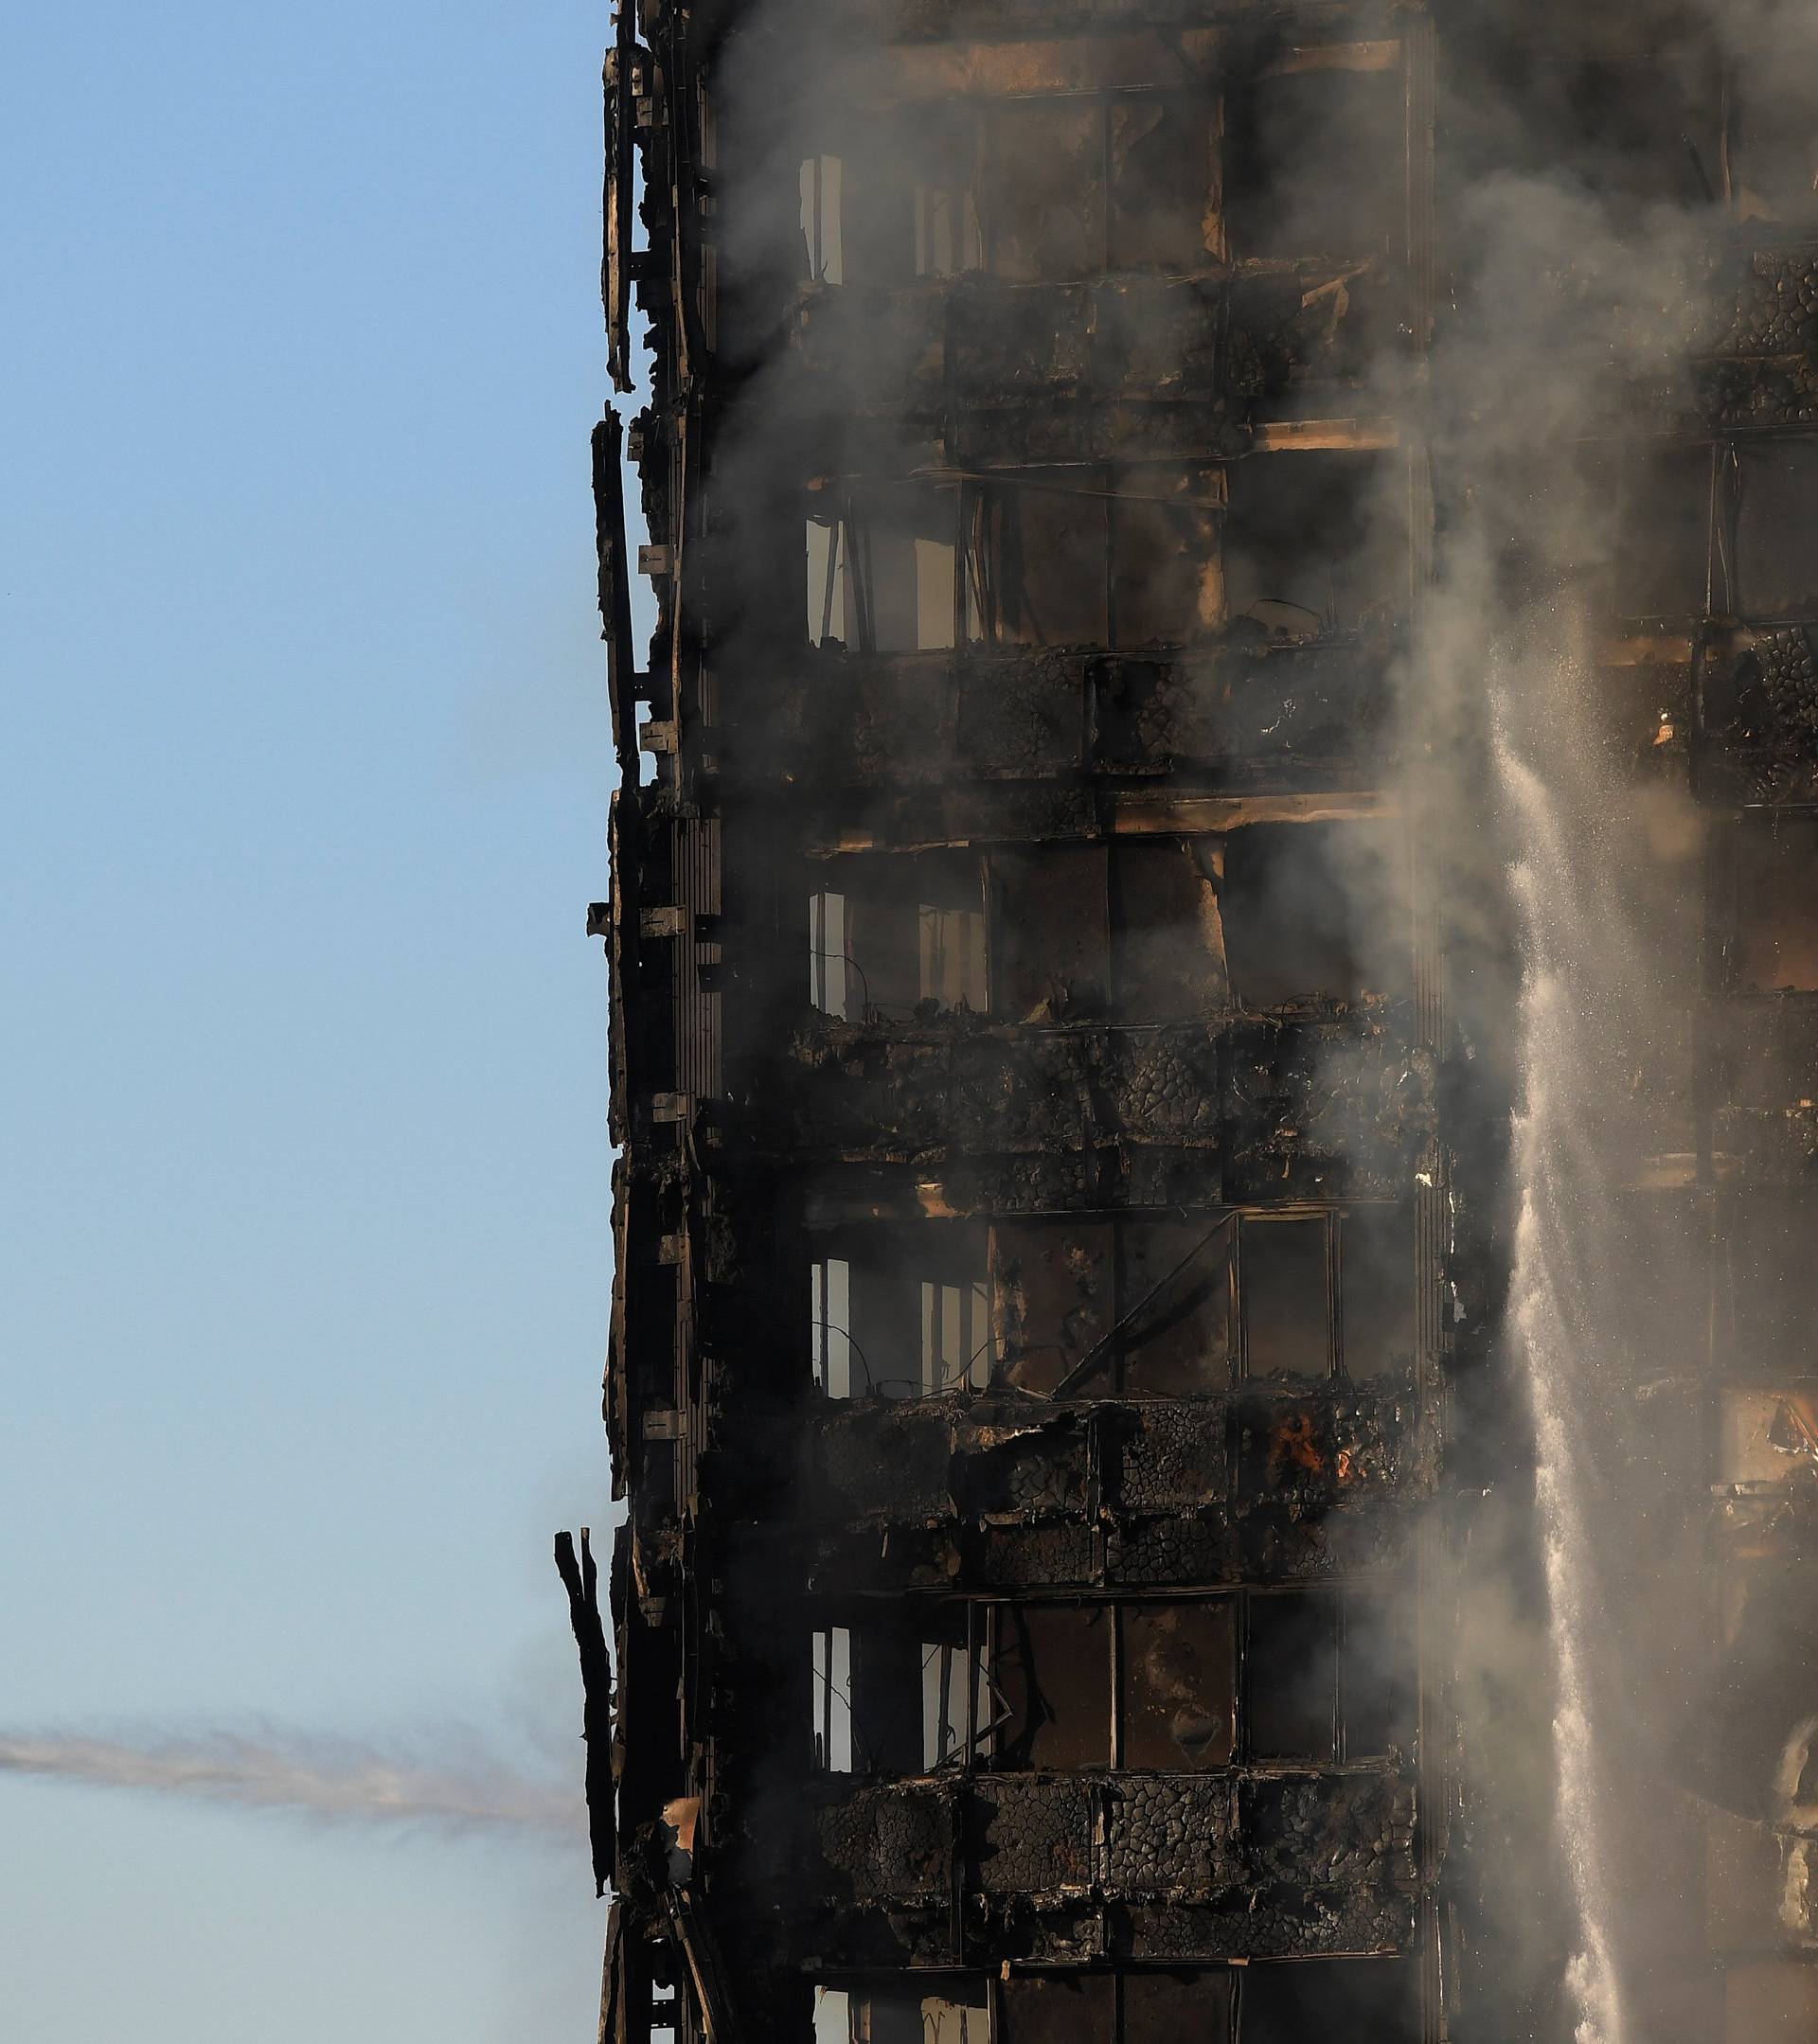 Firefighters tackle a serious fire in a tower block at Latimer Road in West London